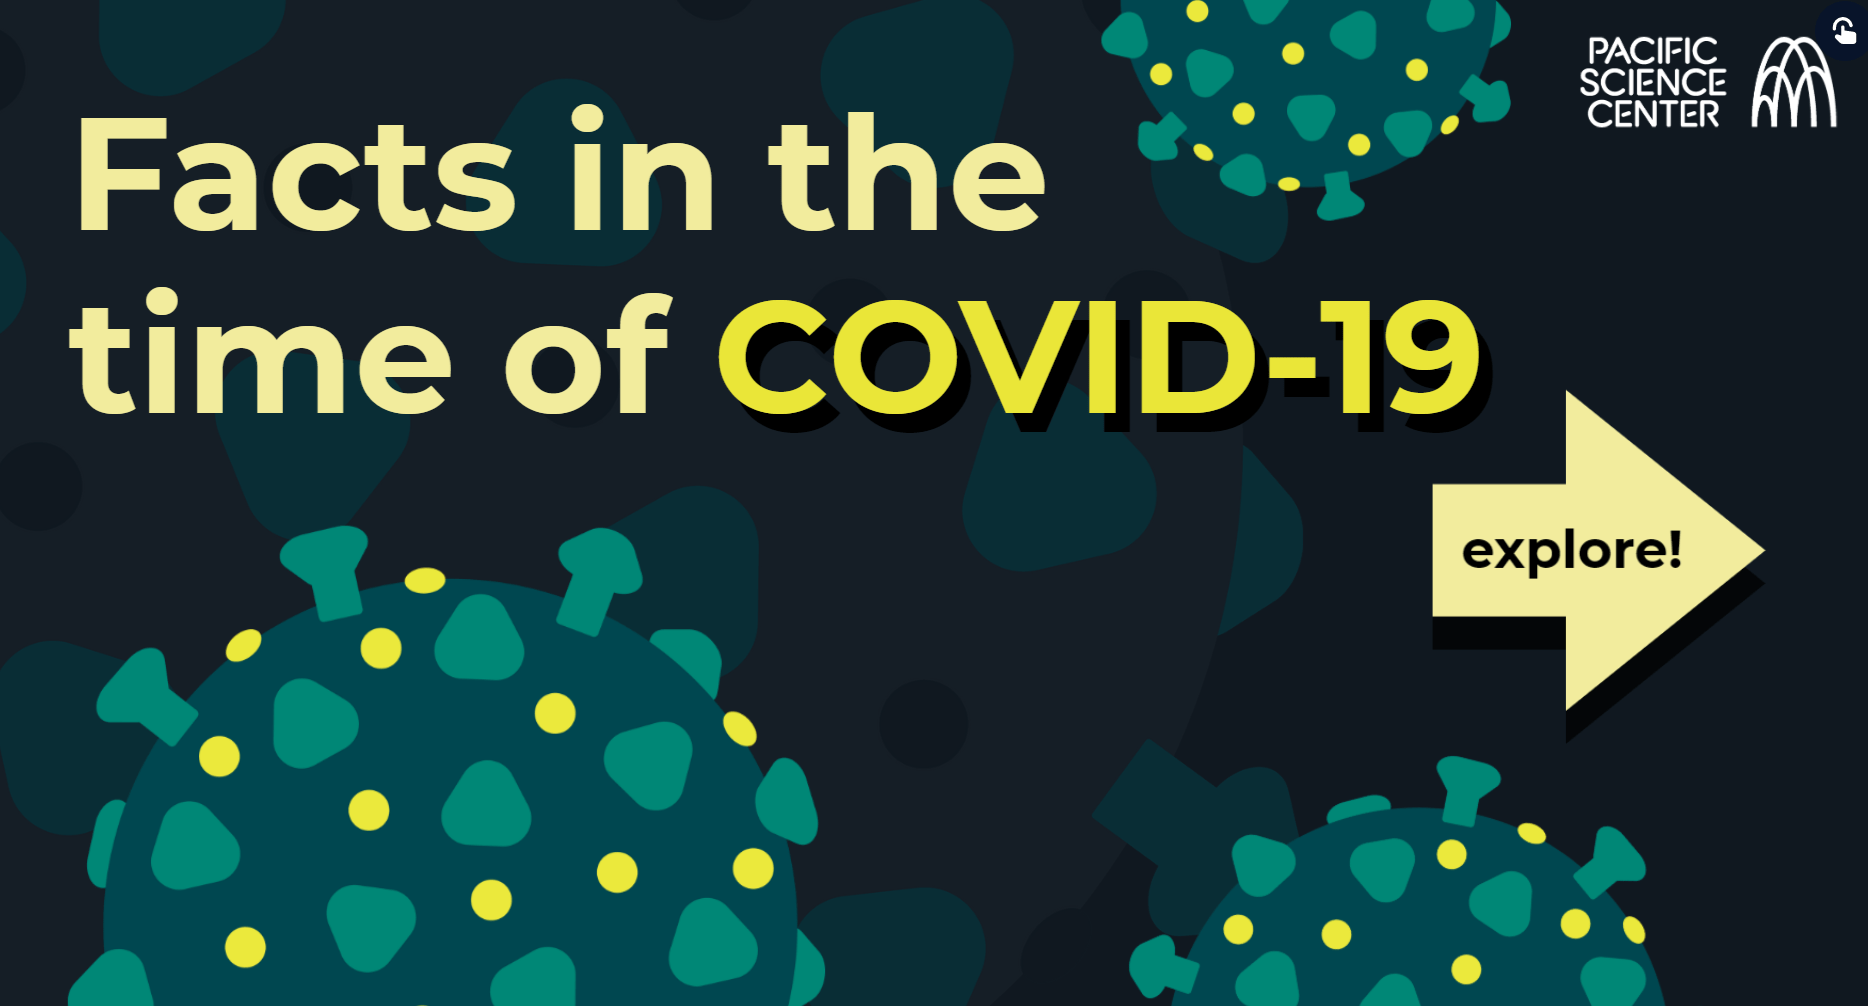 Facts in the Time of COVID-19 virtual exhibit